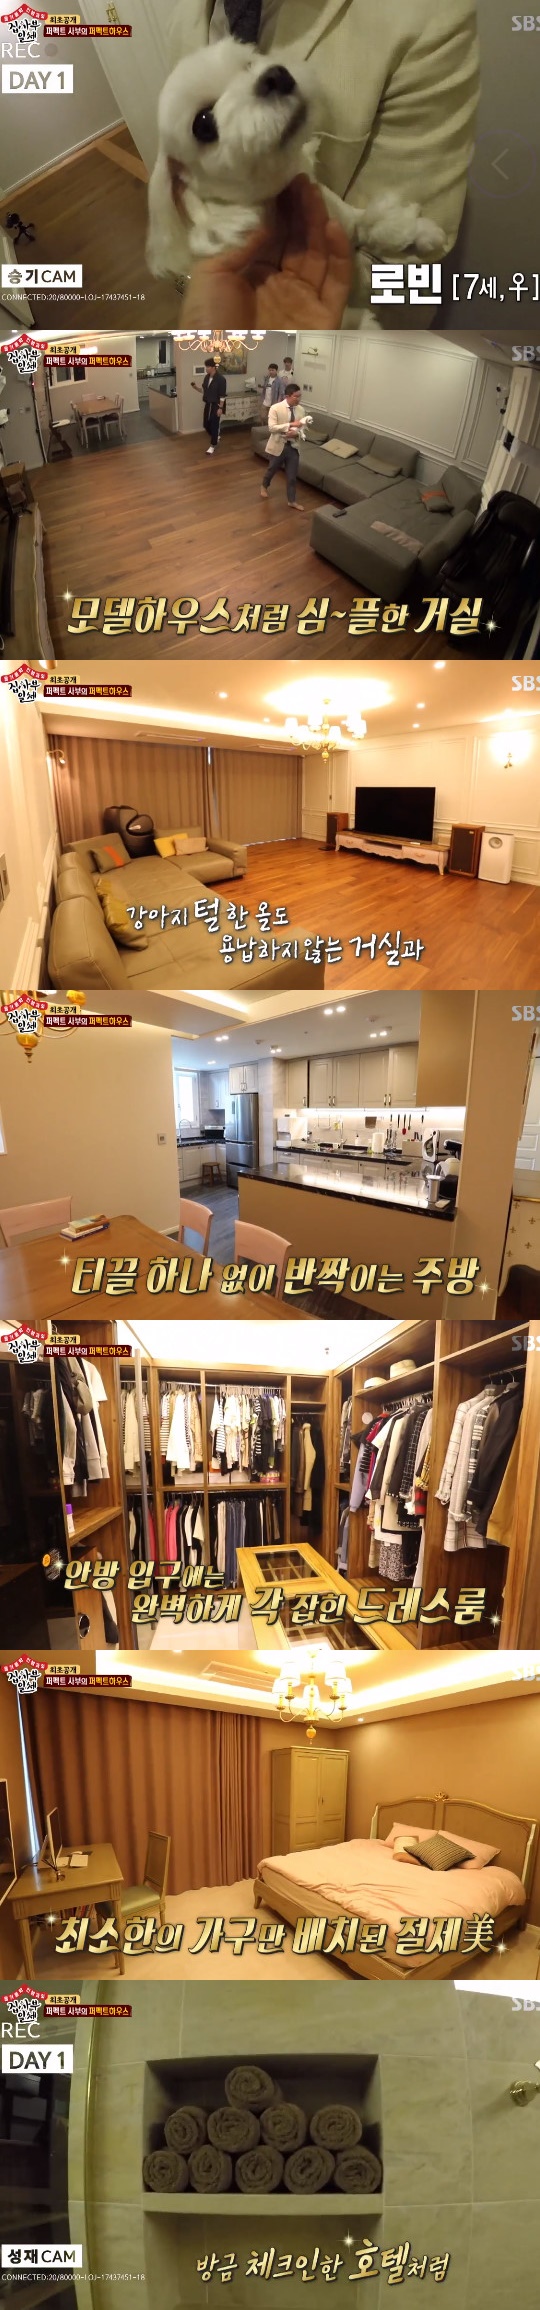 Korean history lecturer Seol Min-Seok has unveiled his house at All The Butlers.In the SBS entertainment program All The Butlers broadcasted on the evening of the 8th, Seol Min-Seok appeared as a new master.On this day, Seol Min-seok invited Lee Sang-yoon Lee Seung-gi Yook Sungjae Yang Se-hyeong, a young four-member, to his house.It was a nest of Seol Min-Seok, where the dog was welcomed from the entrance.In particular, Seol Min-Seoks house boasted a spacious, neat and colorful interior as he proved to be a Korean lecturer.The four youths who looked every inch from the living room to the room, bathroom and dress room admired the house of Seol Min-Seok, who was dustless.When asked about the bed of the disciples who would sleep, Seol Min-Seok said, You can sleep together in bed. Yang Se-hyeong said, If this is clean, I think I will throw that bed away as soon as I lie in our bed.As much as that, the dress room was hanging on the hanger with each of the clothes caught.In the bathroom, towels were dried one by one like Hotel, and clean items such as shampoo were also provided.Lee Sang-yoon said, I want to live like this if someone does this. Lee Seung-gi and Yook Sungjae said, It is the highest level of Masters house so far, and It is luxurious in the past.